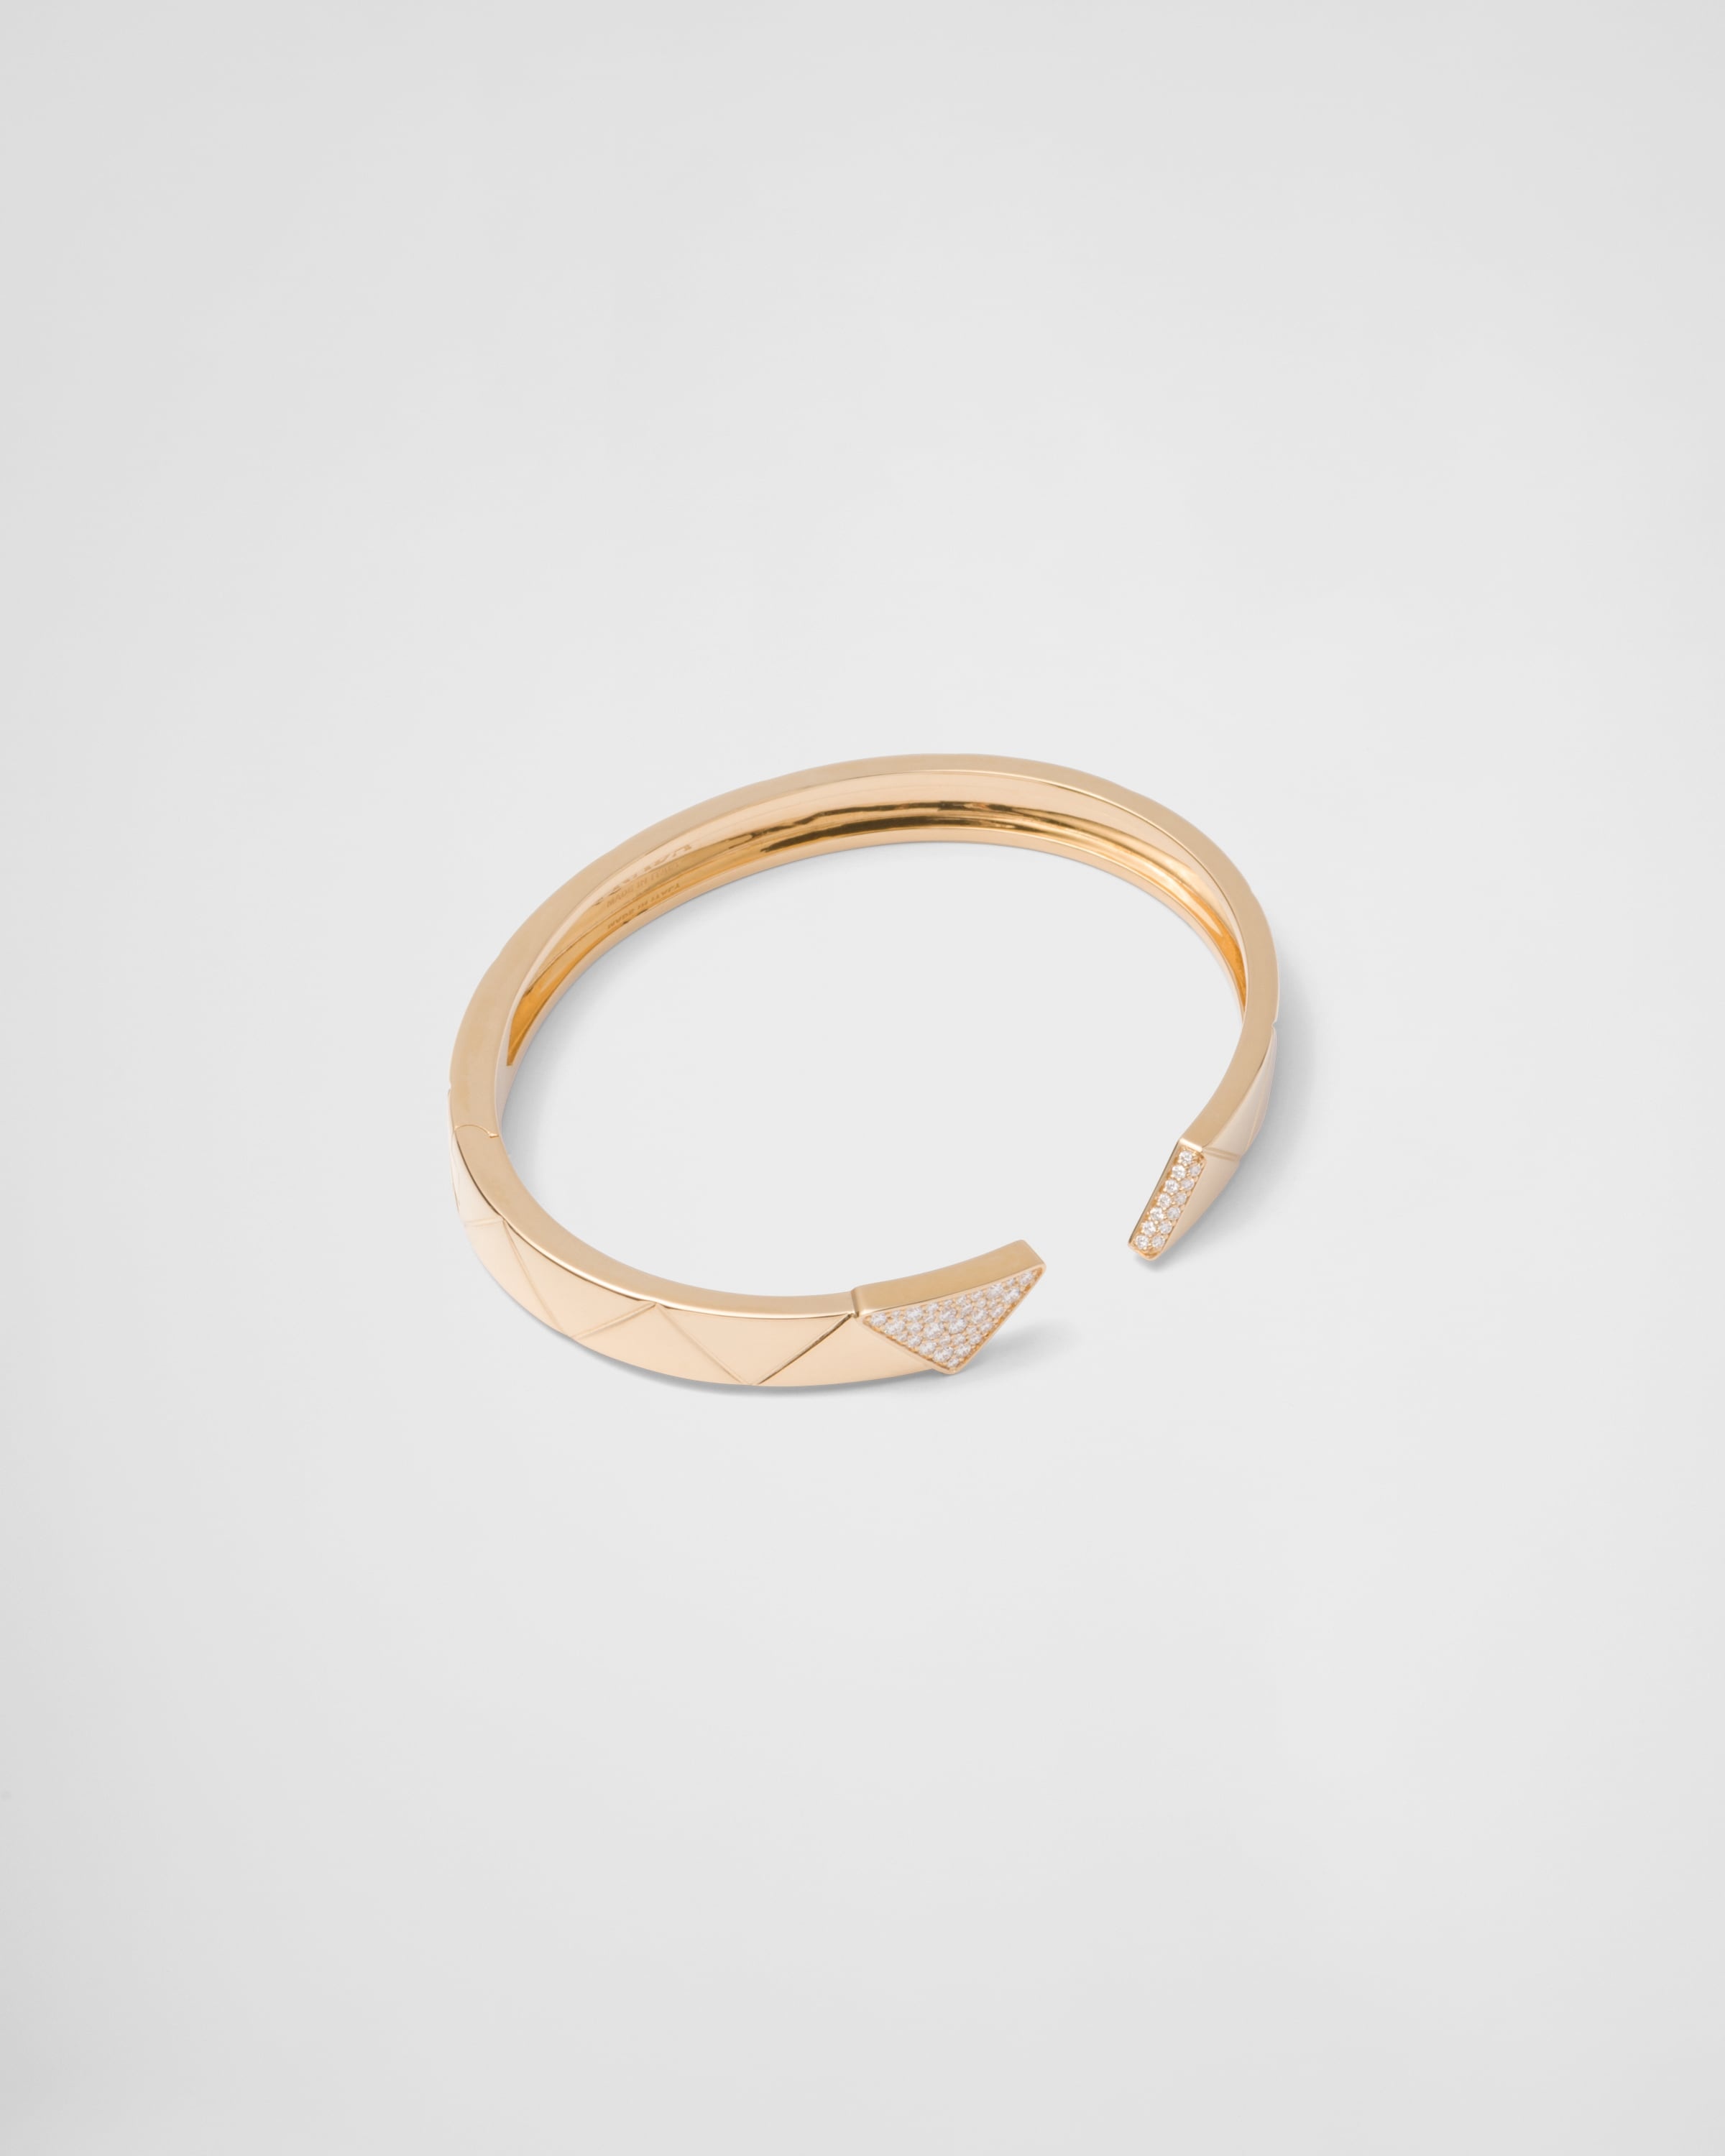 Eternal Gold bangle bracelet in yellow gold with diamonds - 1